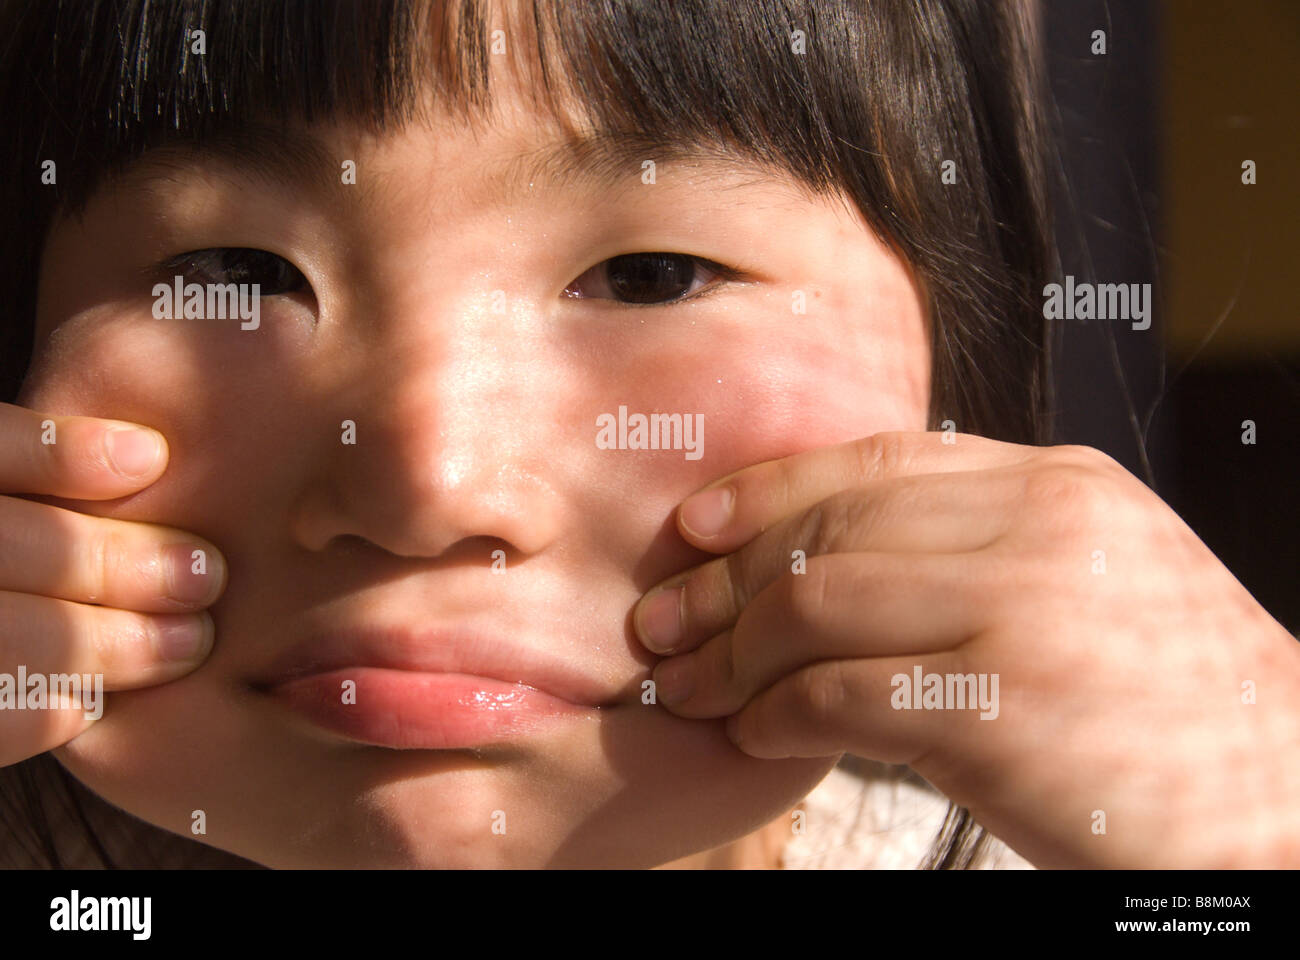 A young Japanese girl makes a face by pulling her cheeks out with her fingers Stock Photo